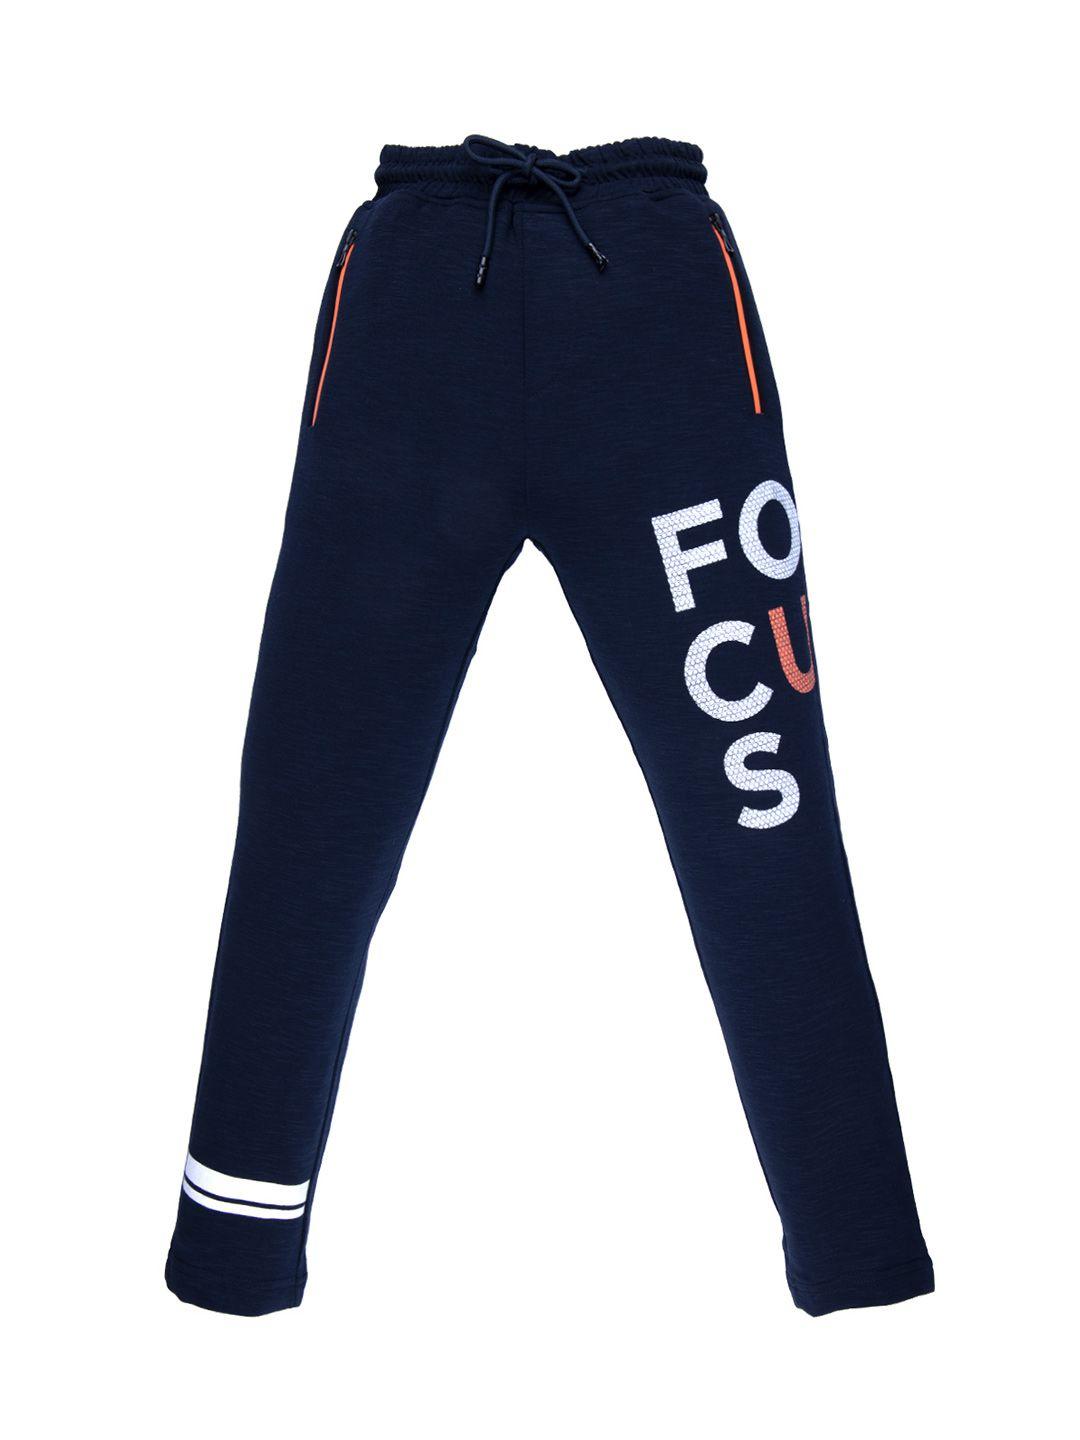 status quo boys blue solid track pants